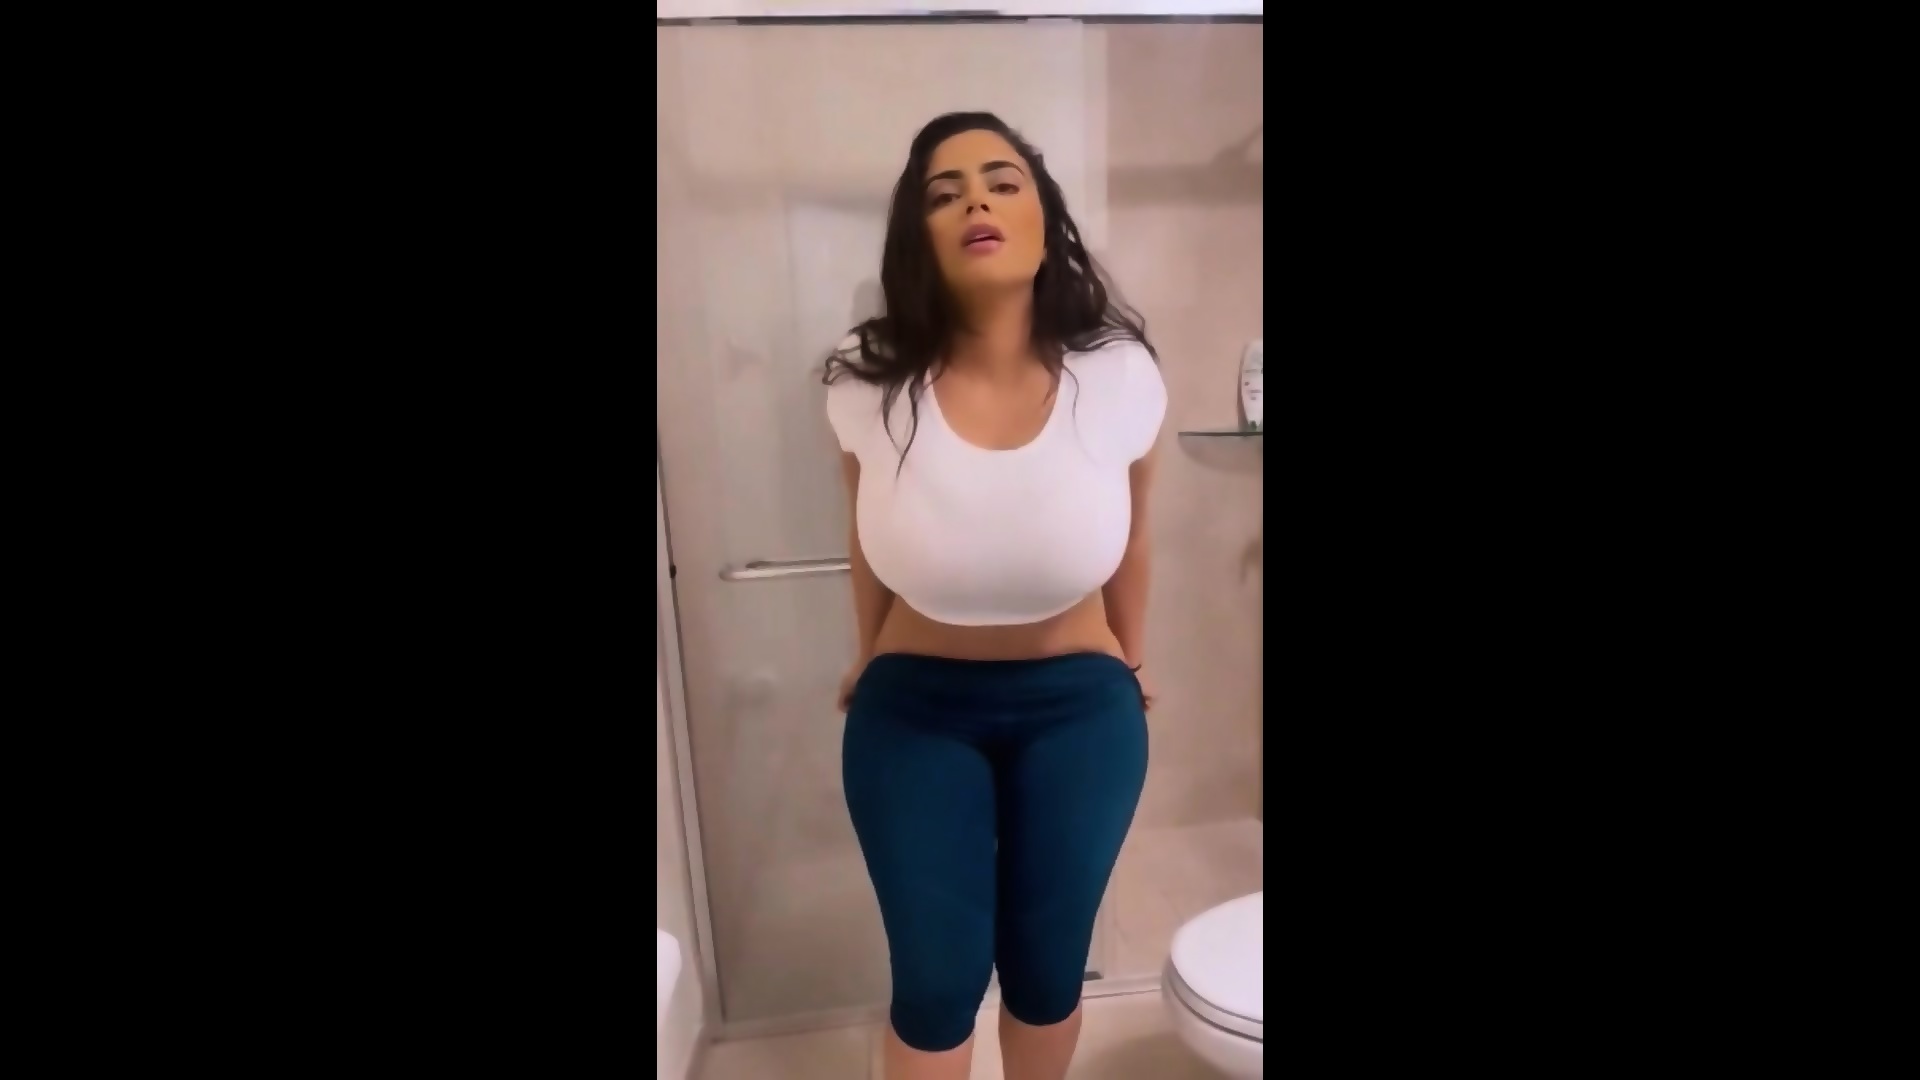 Latina Big Naturals Tits Running Nude - Catching Hot Latina Running In The Morning And Fucking Her In The Bathroom  - EPORNER